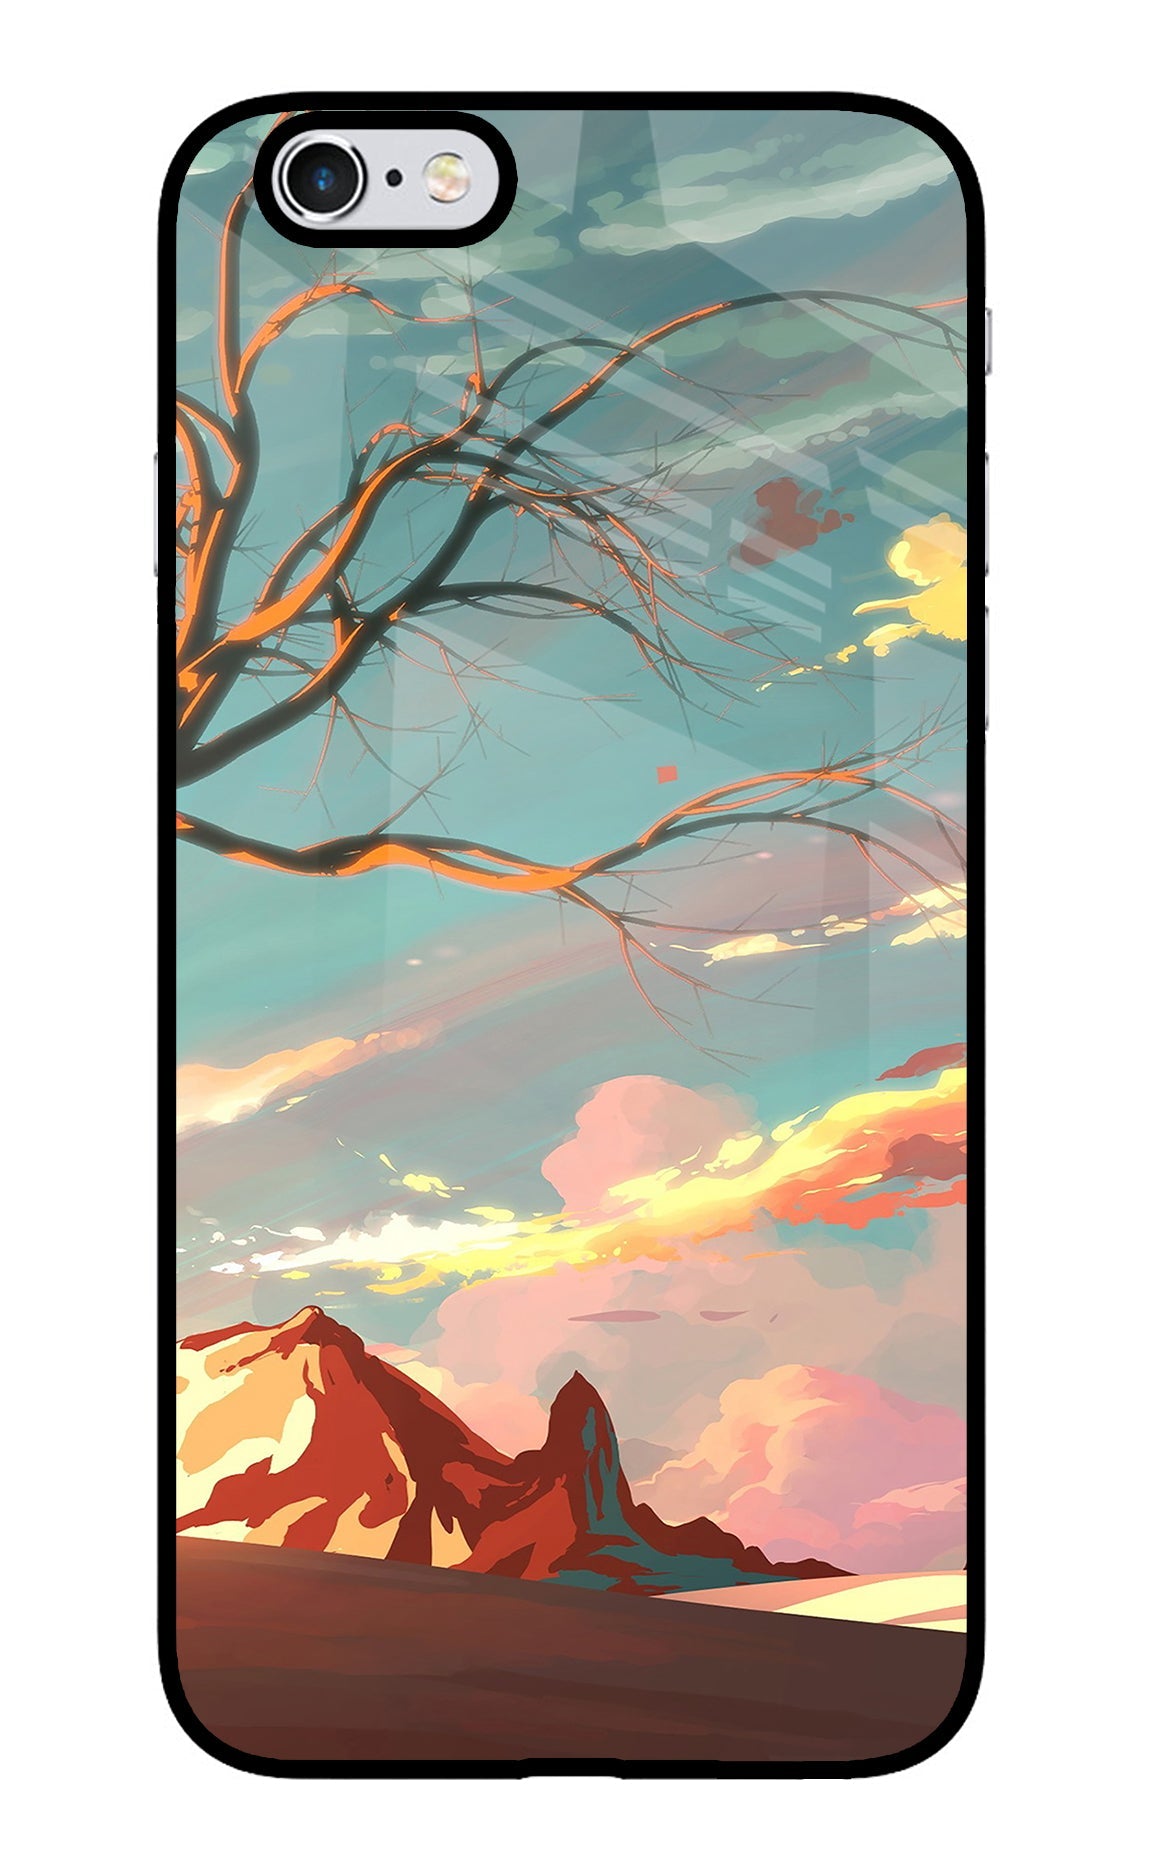 Scenery iPhone 6/6s Glass Case